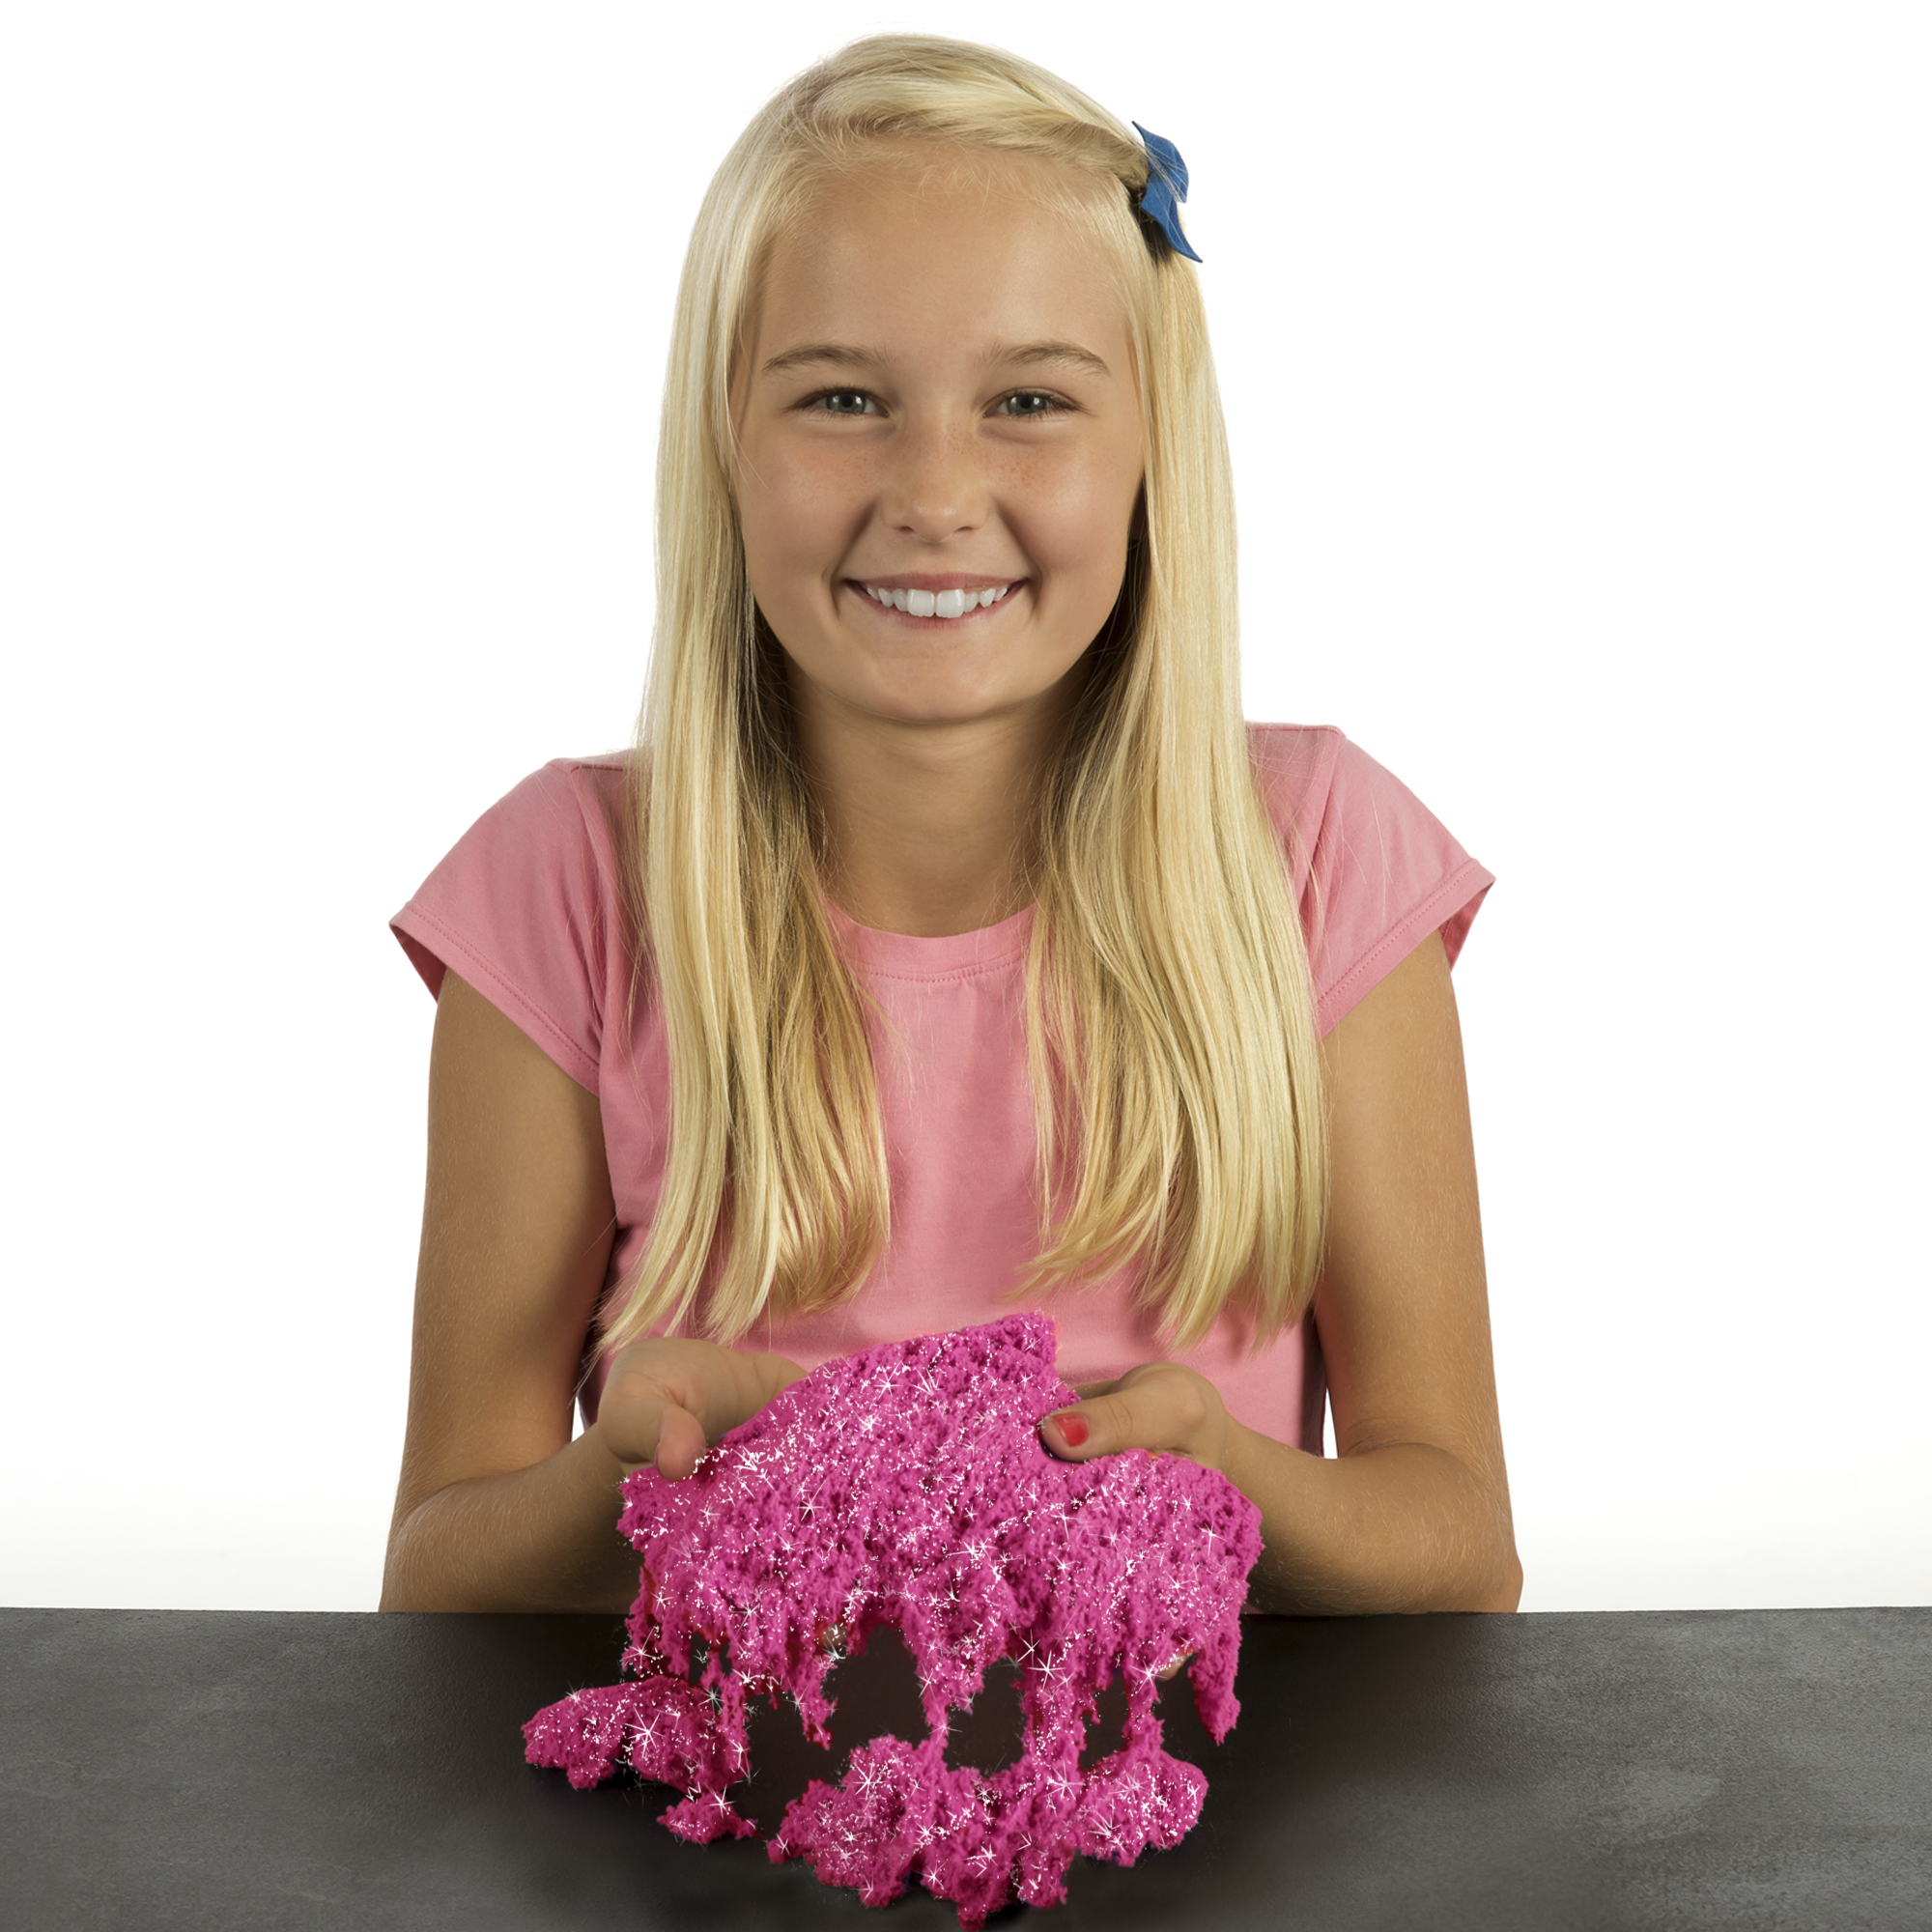 National Geographic Play Sand - 2 lbs of Sand with Castle Molds (Sparkling Pink) - A Fun Sensory Sand Activity - image 5 of 7